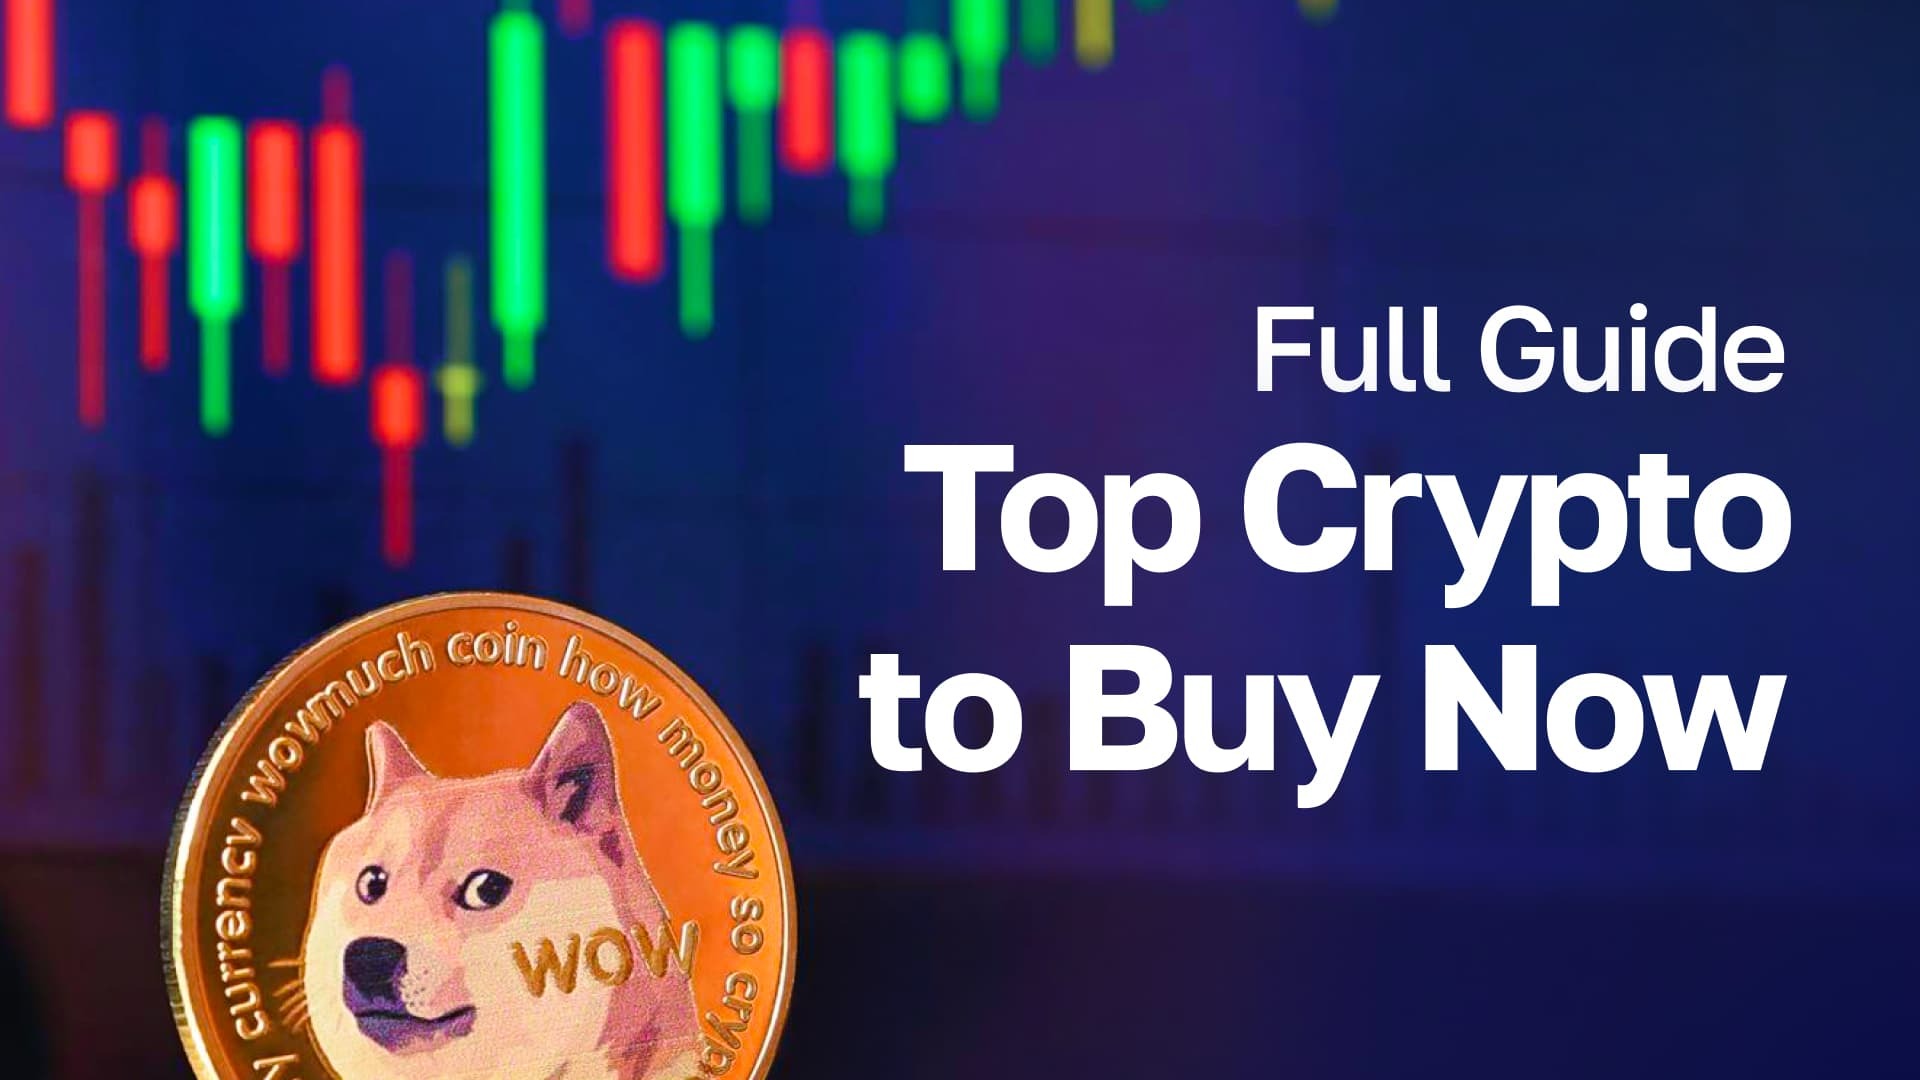 Top-Crypto-to-Buy-Now--Full-Guide